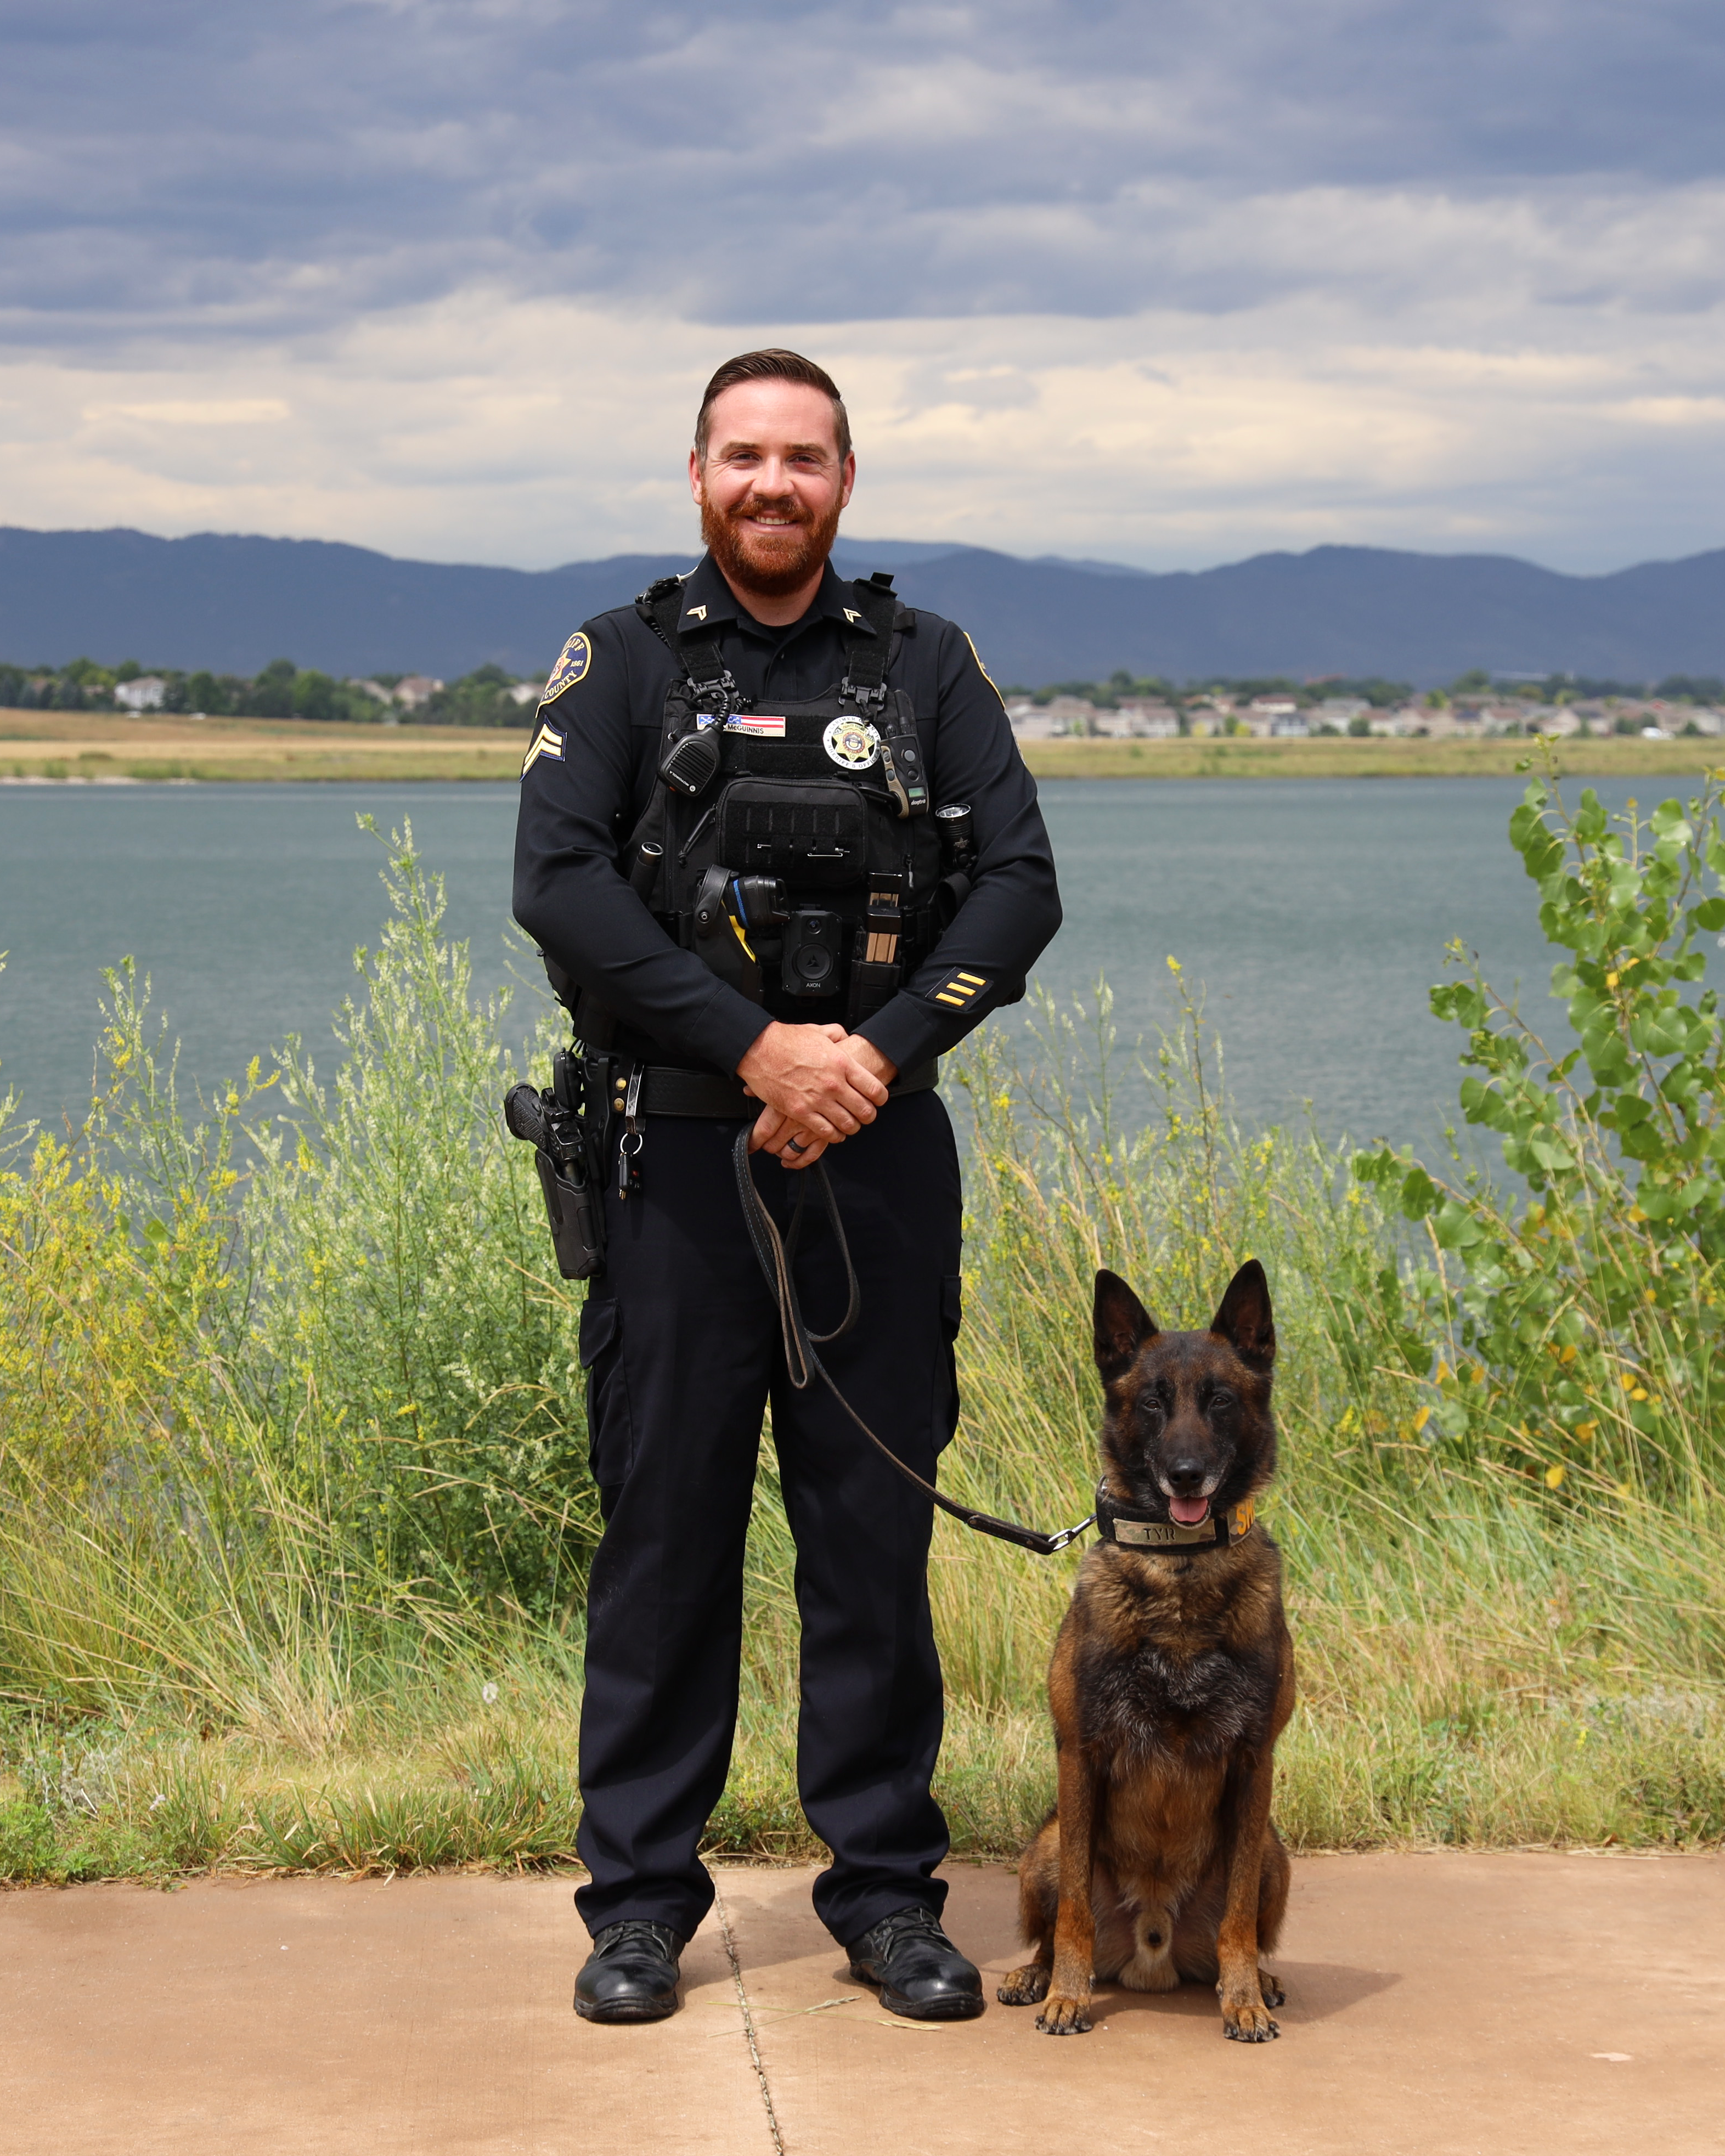 Image 7: Corporal Mitch McGuinnis and K9 Tyr (Belgian Malinois)